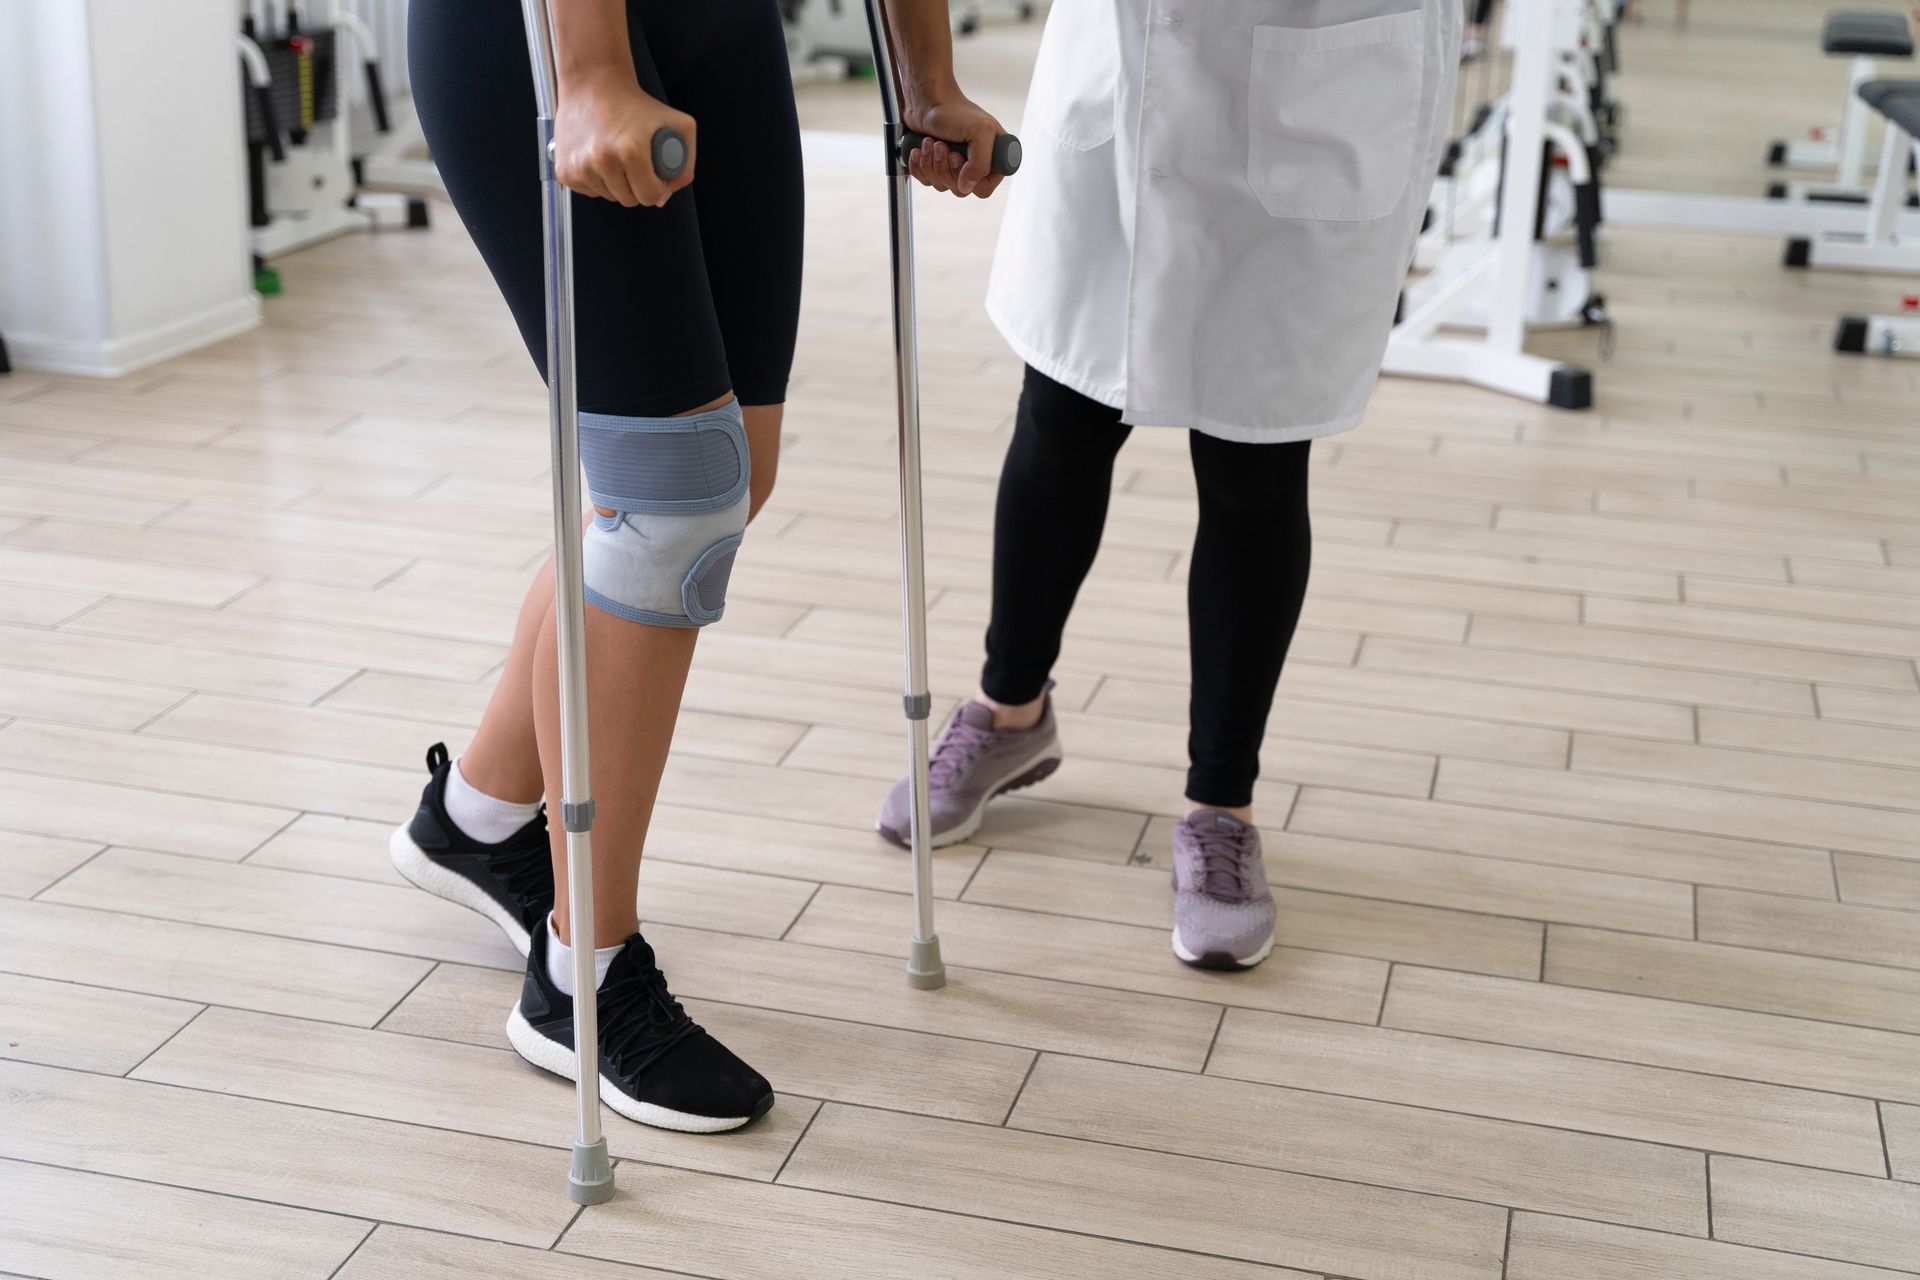 a woman with crutches is being helped by a doctor in a gym .